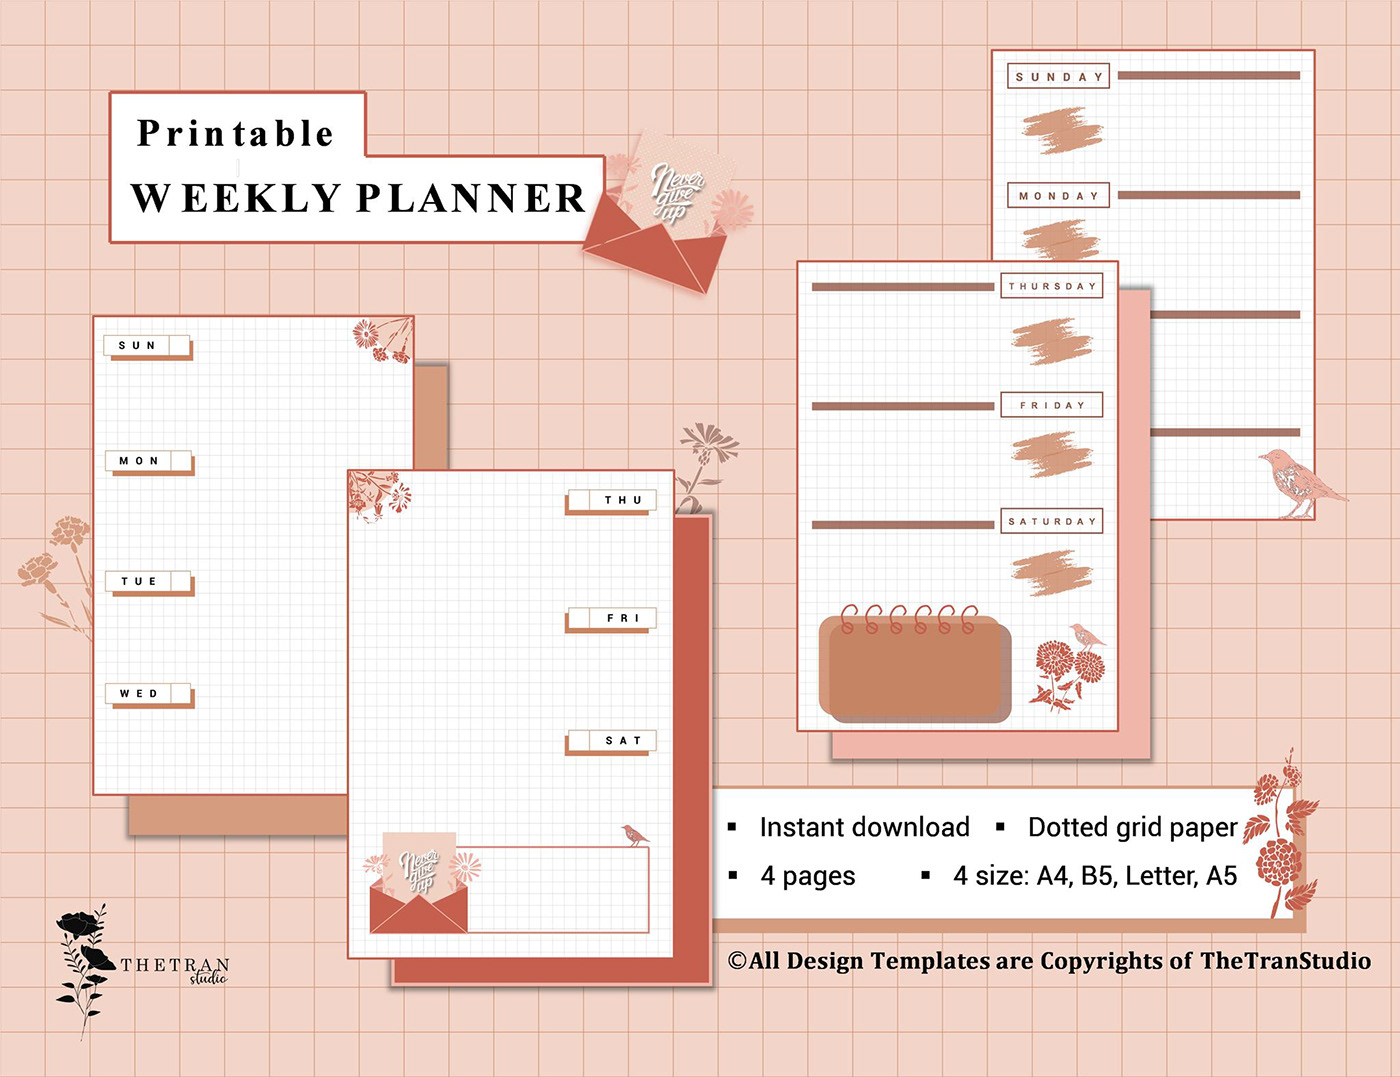 Weekly Planner Thumbnail by The Tran Studio